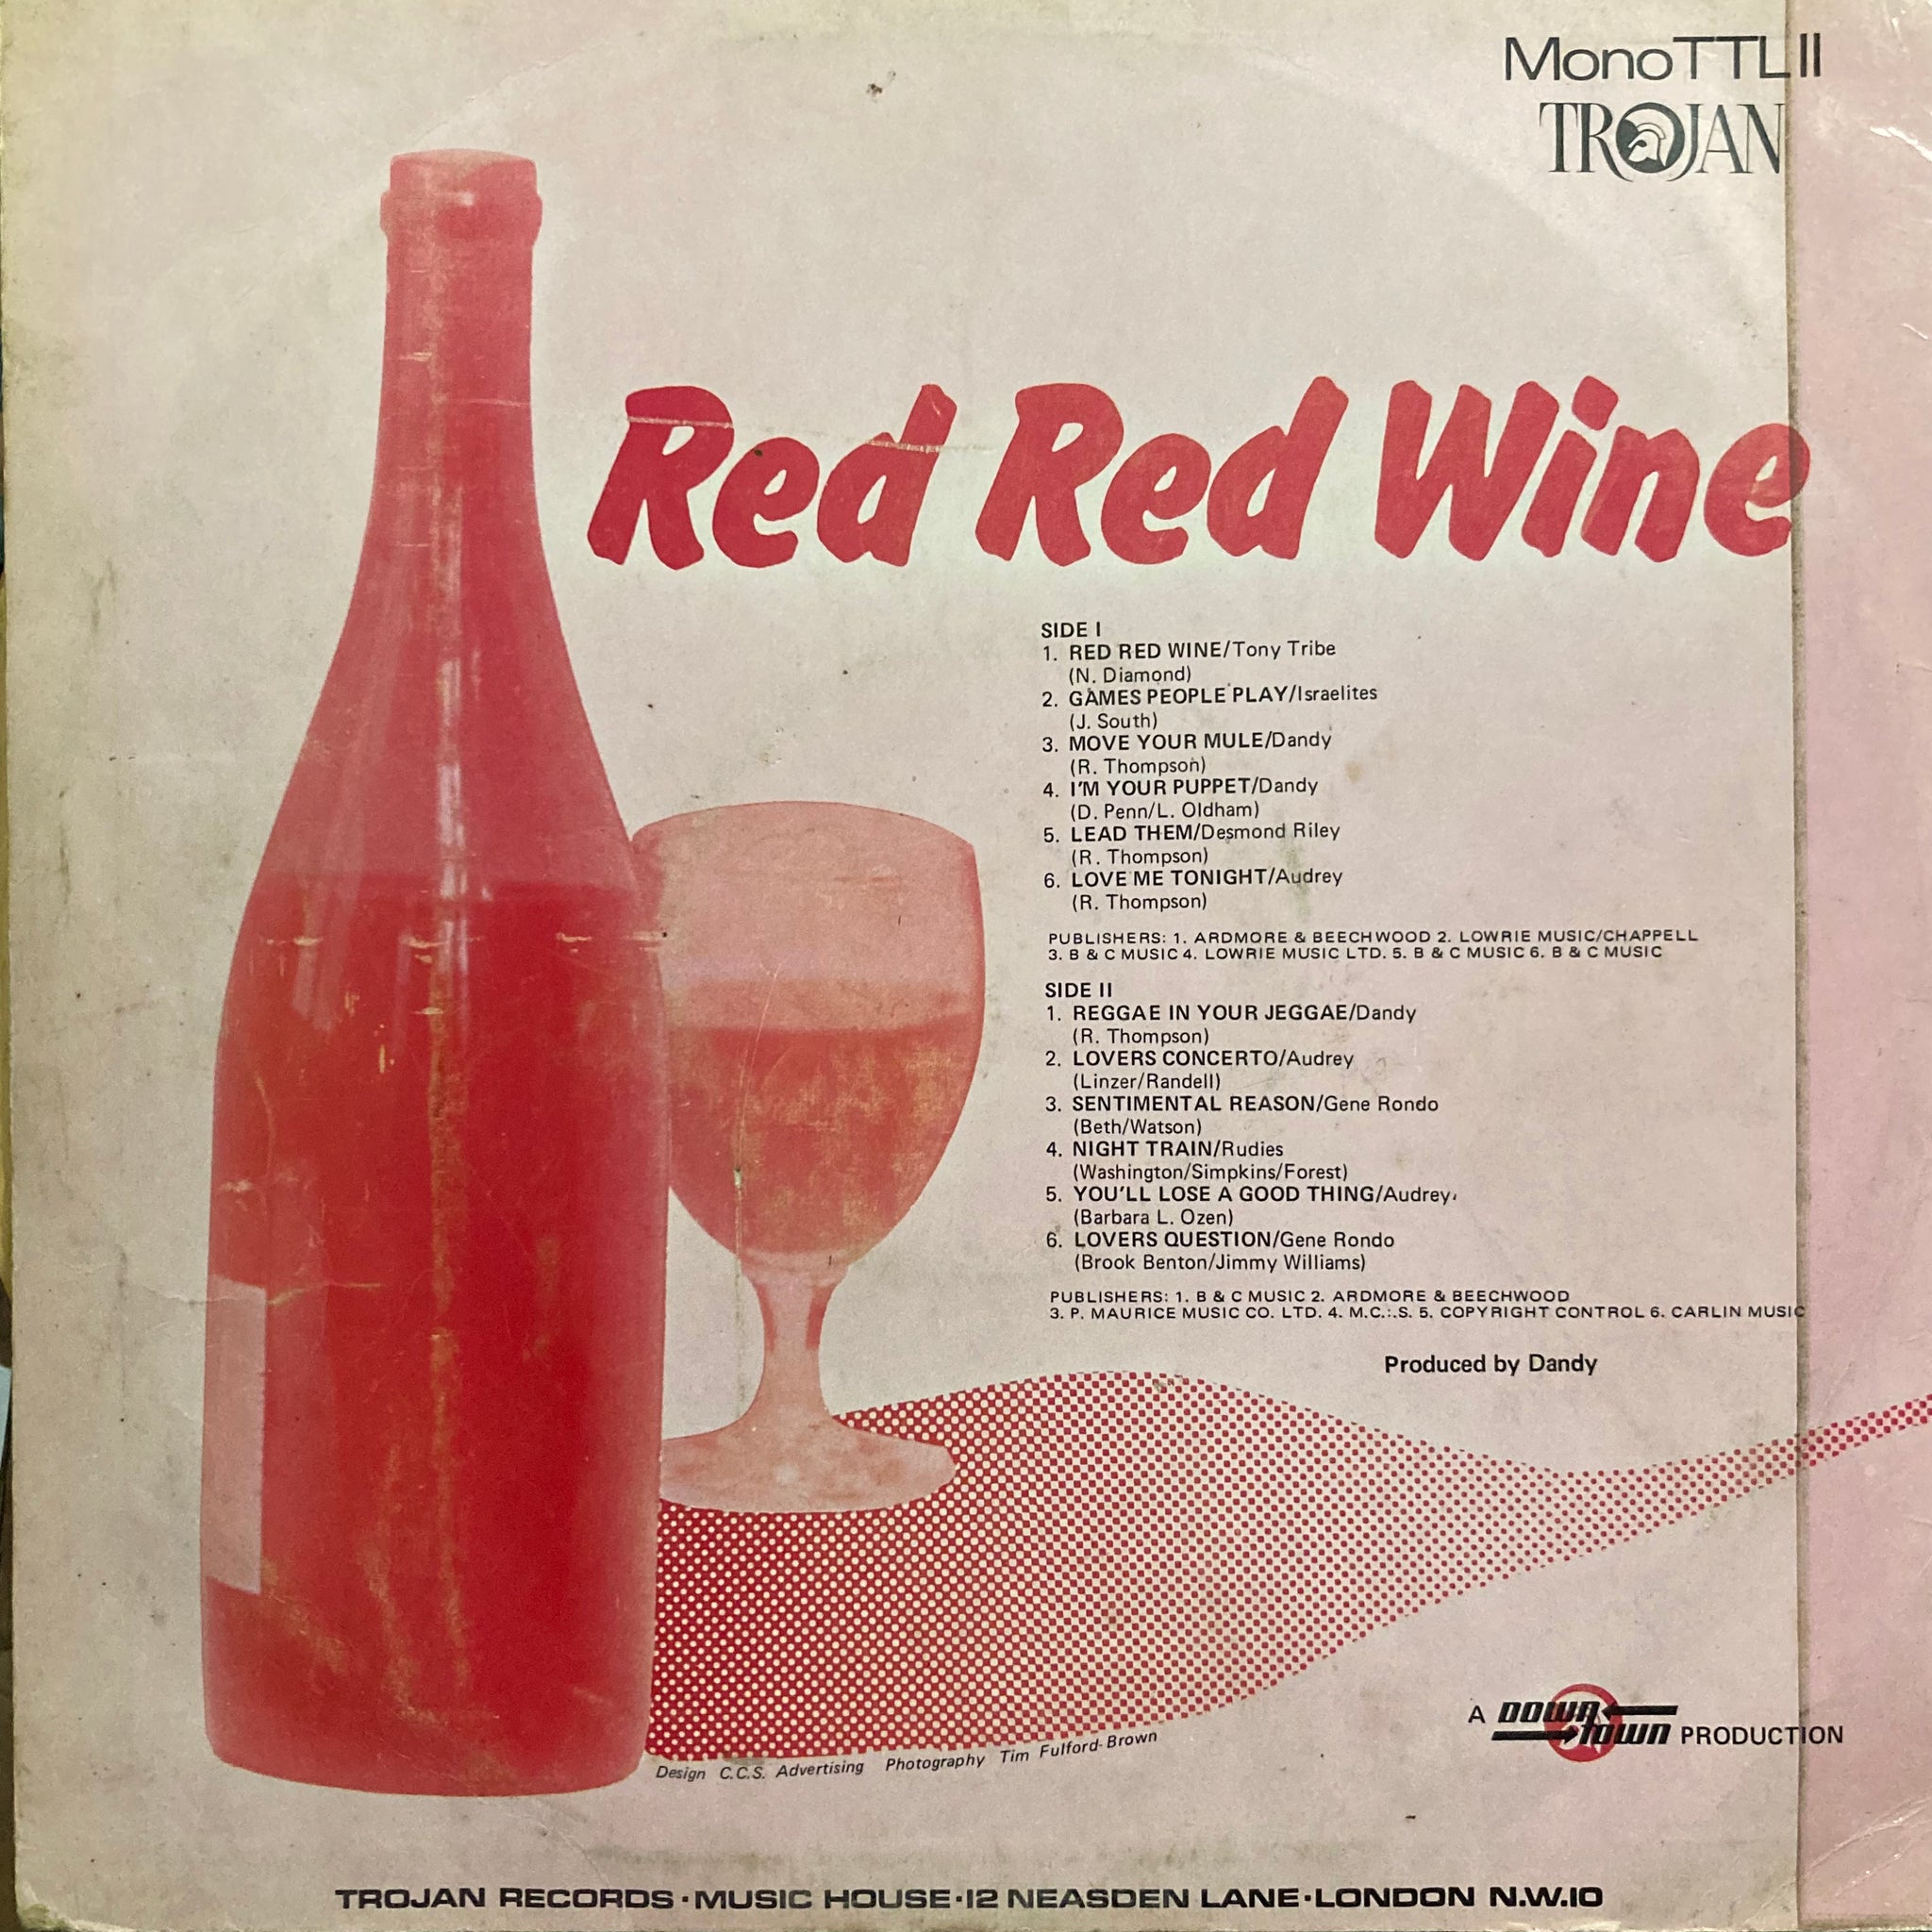 V/A - Red Red Wine by Trojan Records